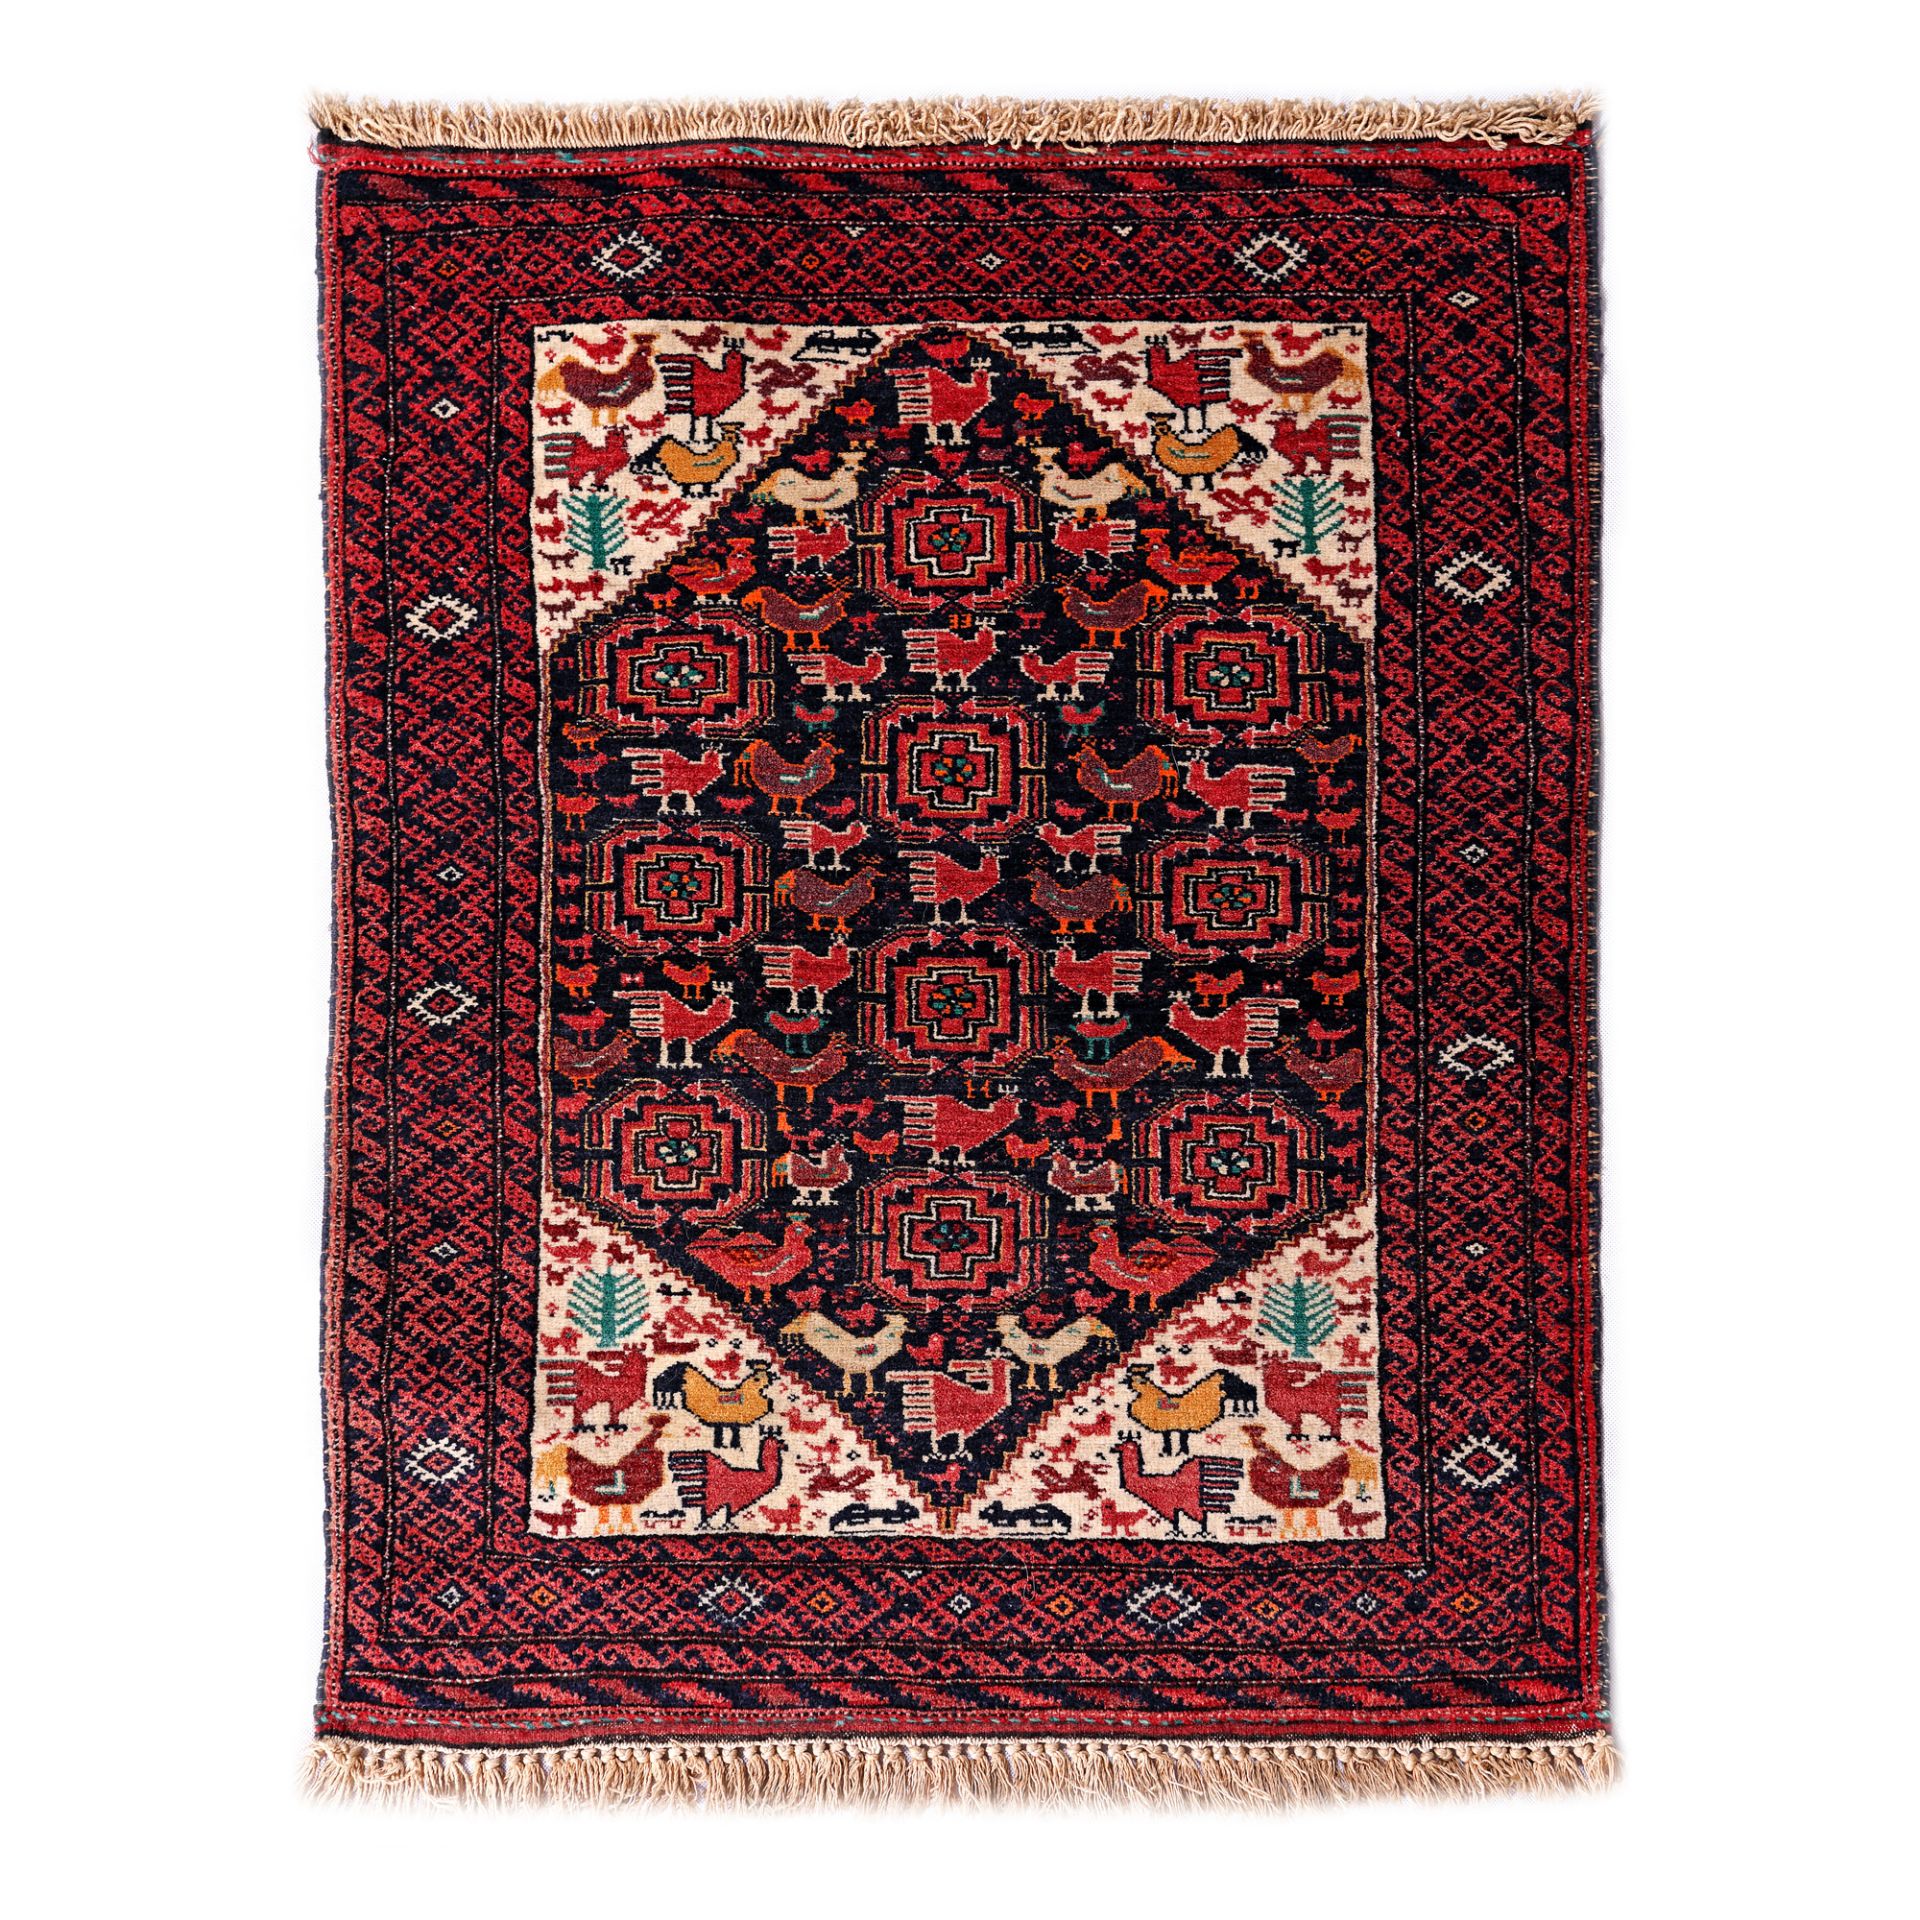 Buhara wool rug, decorated with roosters, Turkmenistan, mid-20th century